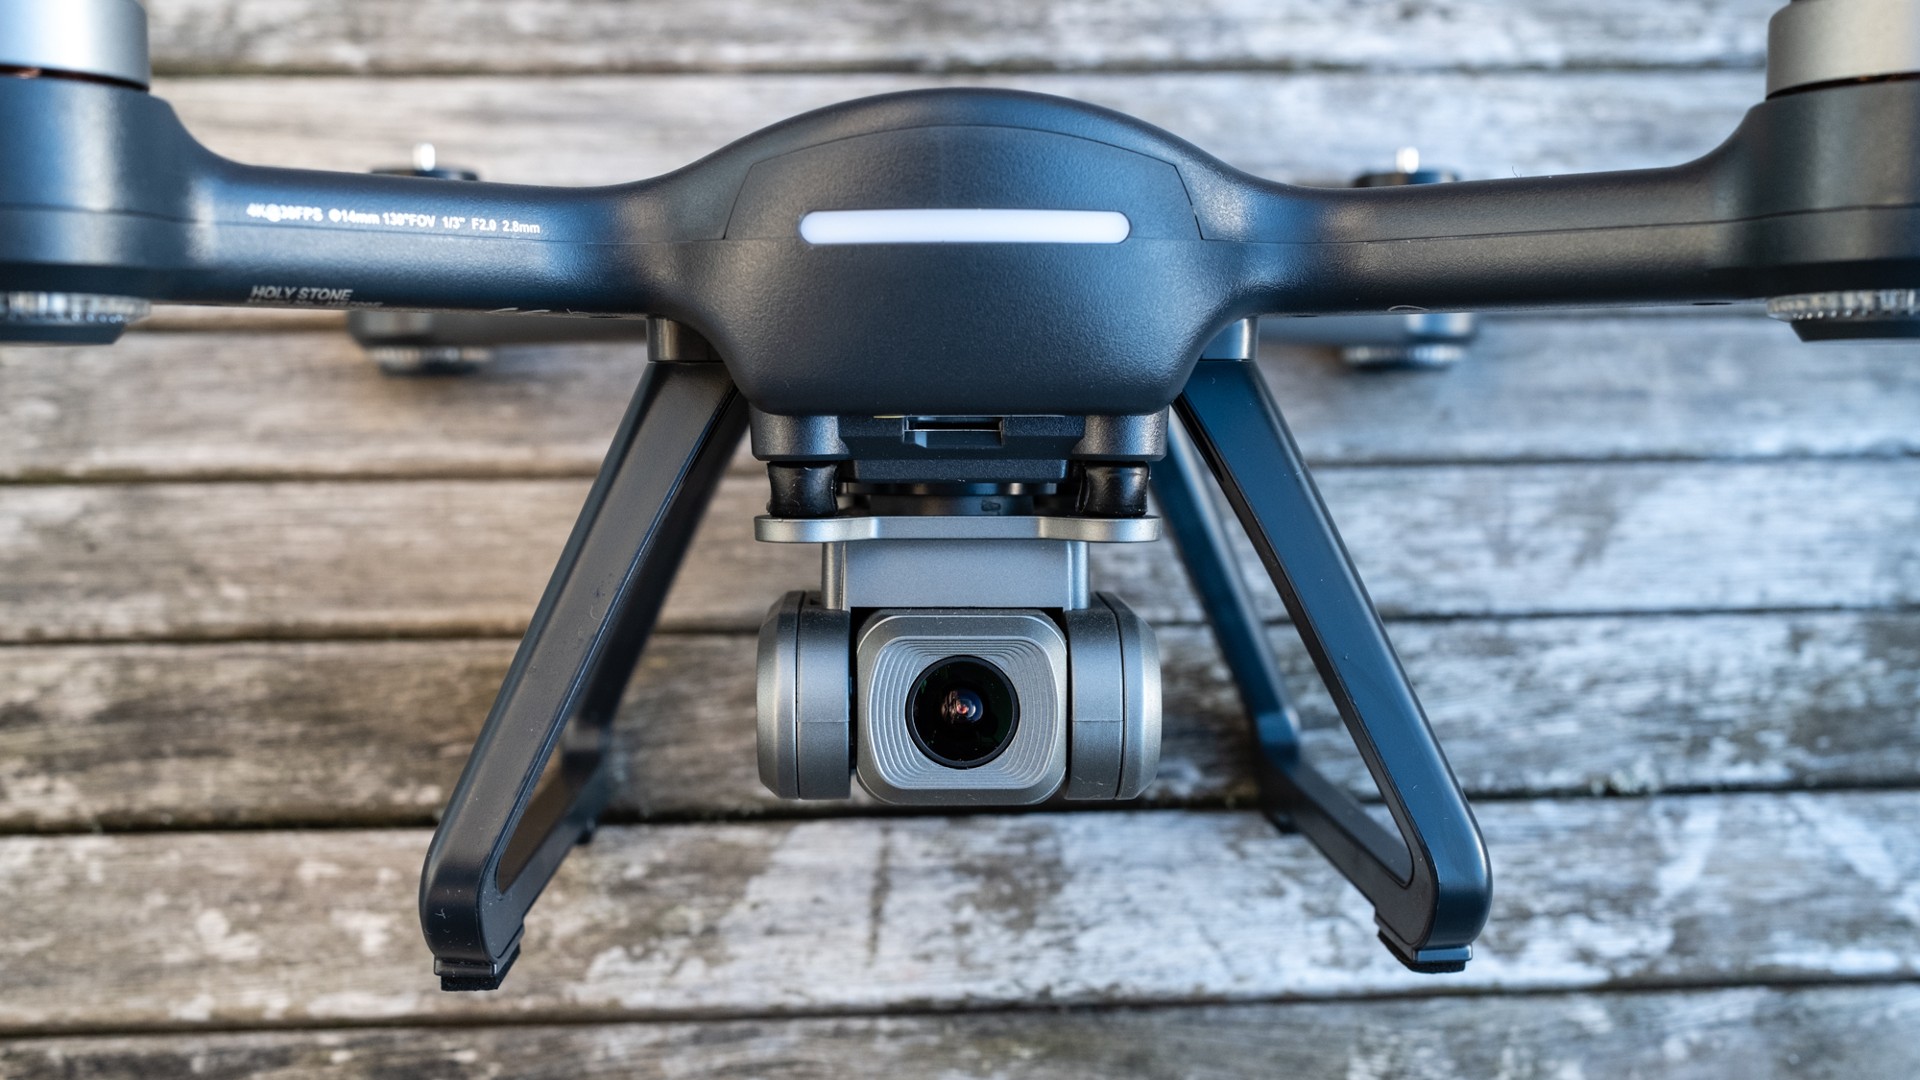 Prime Day drone deal: Save $110 on the Holy Stone HS700E